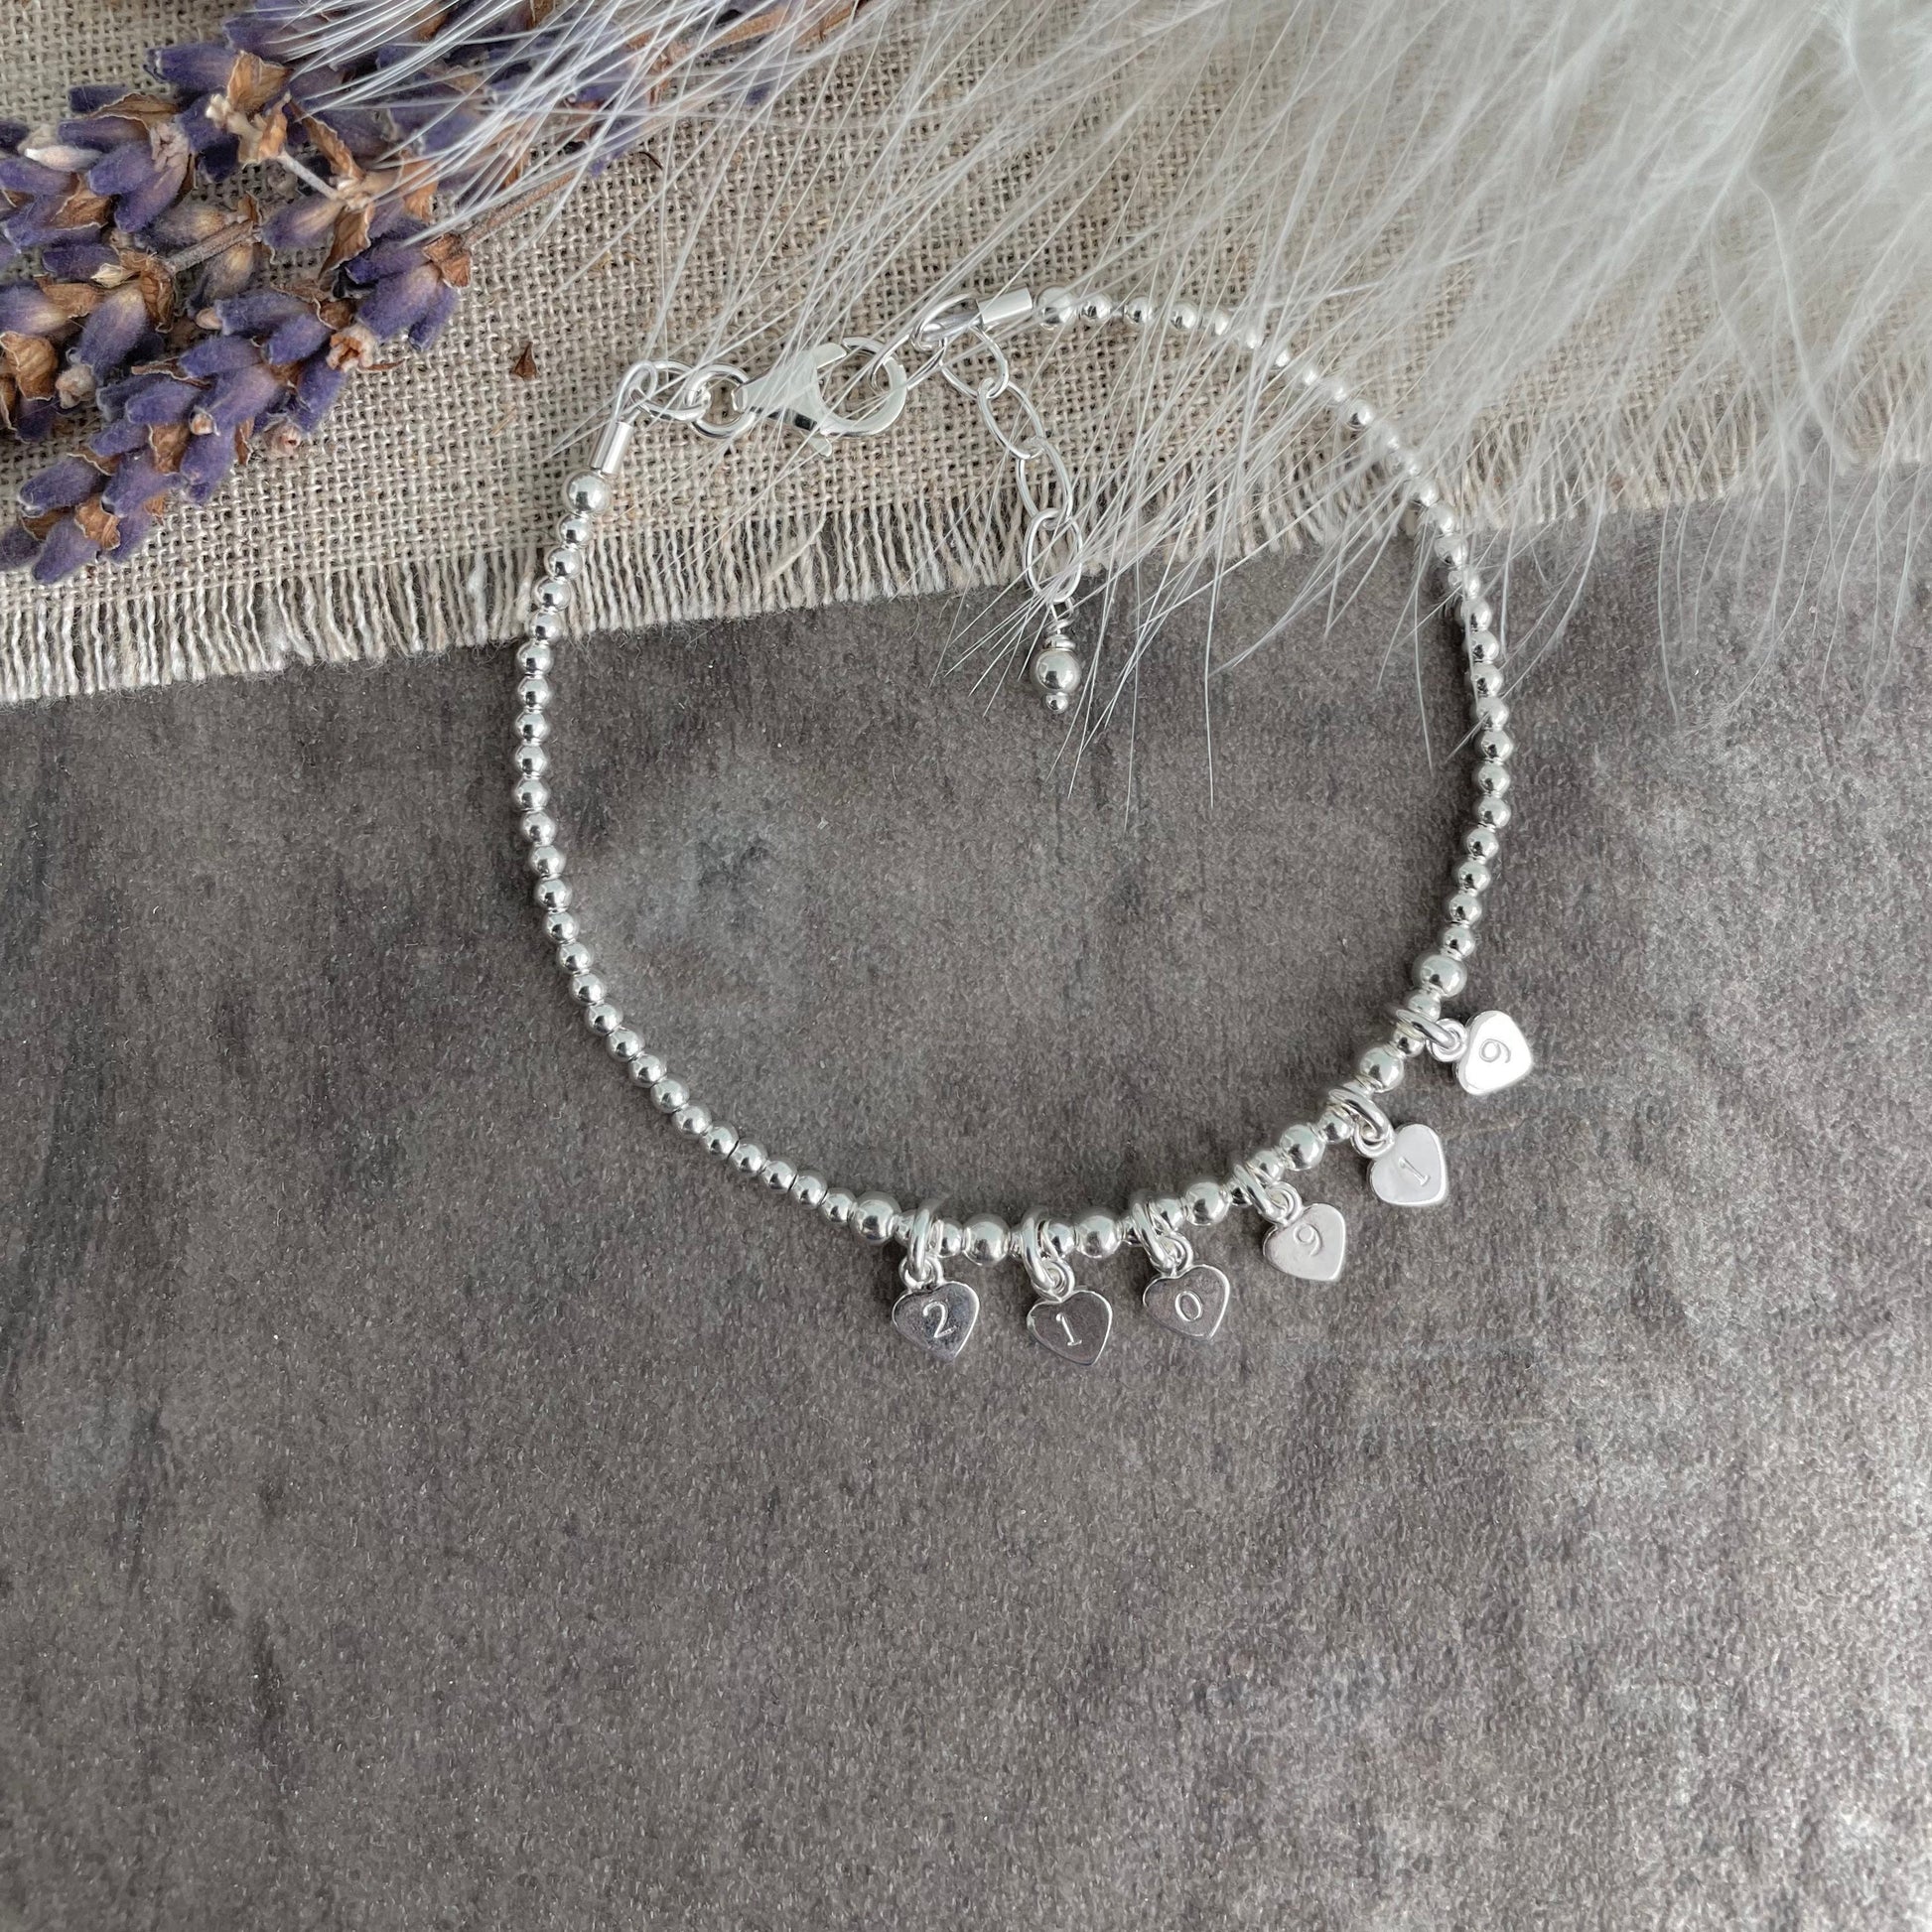 Bracelet for new mum, Dainty Date Bracelet with Baby Birth Date in Sterling Silver